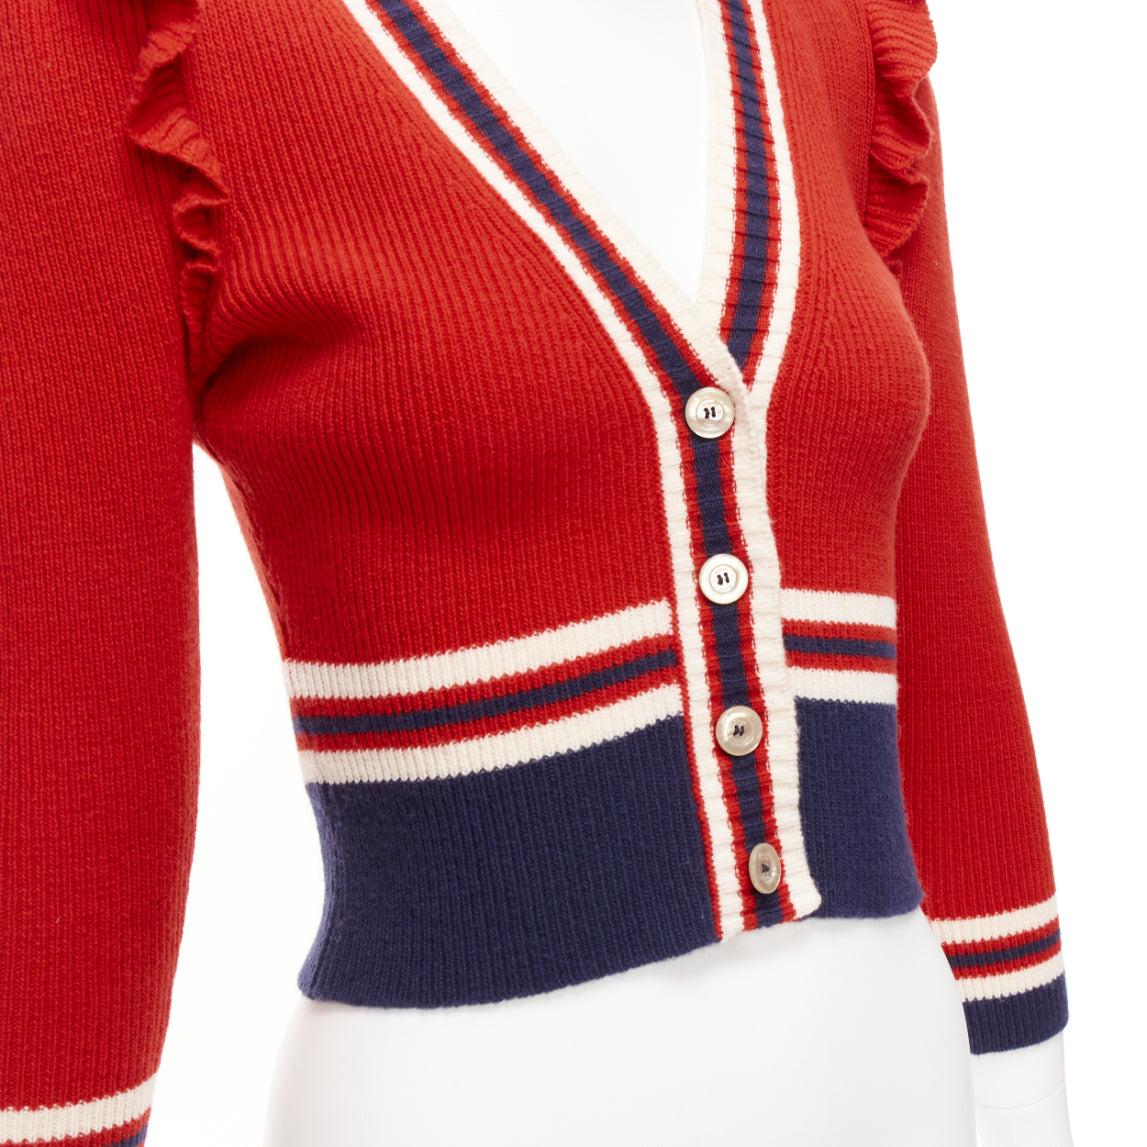 GUCCI 100% wool red navy ruffle trim ribbed hem cropped cardigan XS
Reference: EALU/A00012
Brand: Gucci
Designer: Alessandro Michele
Material: Wool
Color: Red, Navy
Pattern: Striped
Closure: Button
Extra Details: Striped ribs at collar and hem at